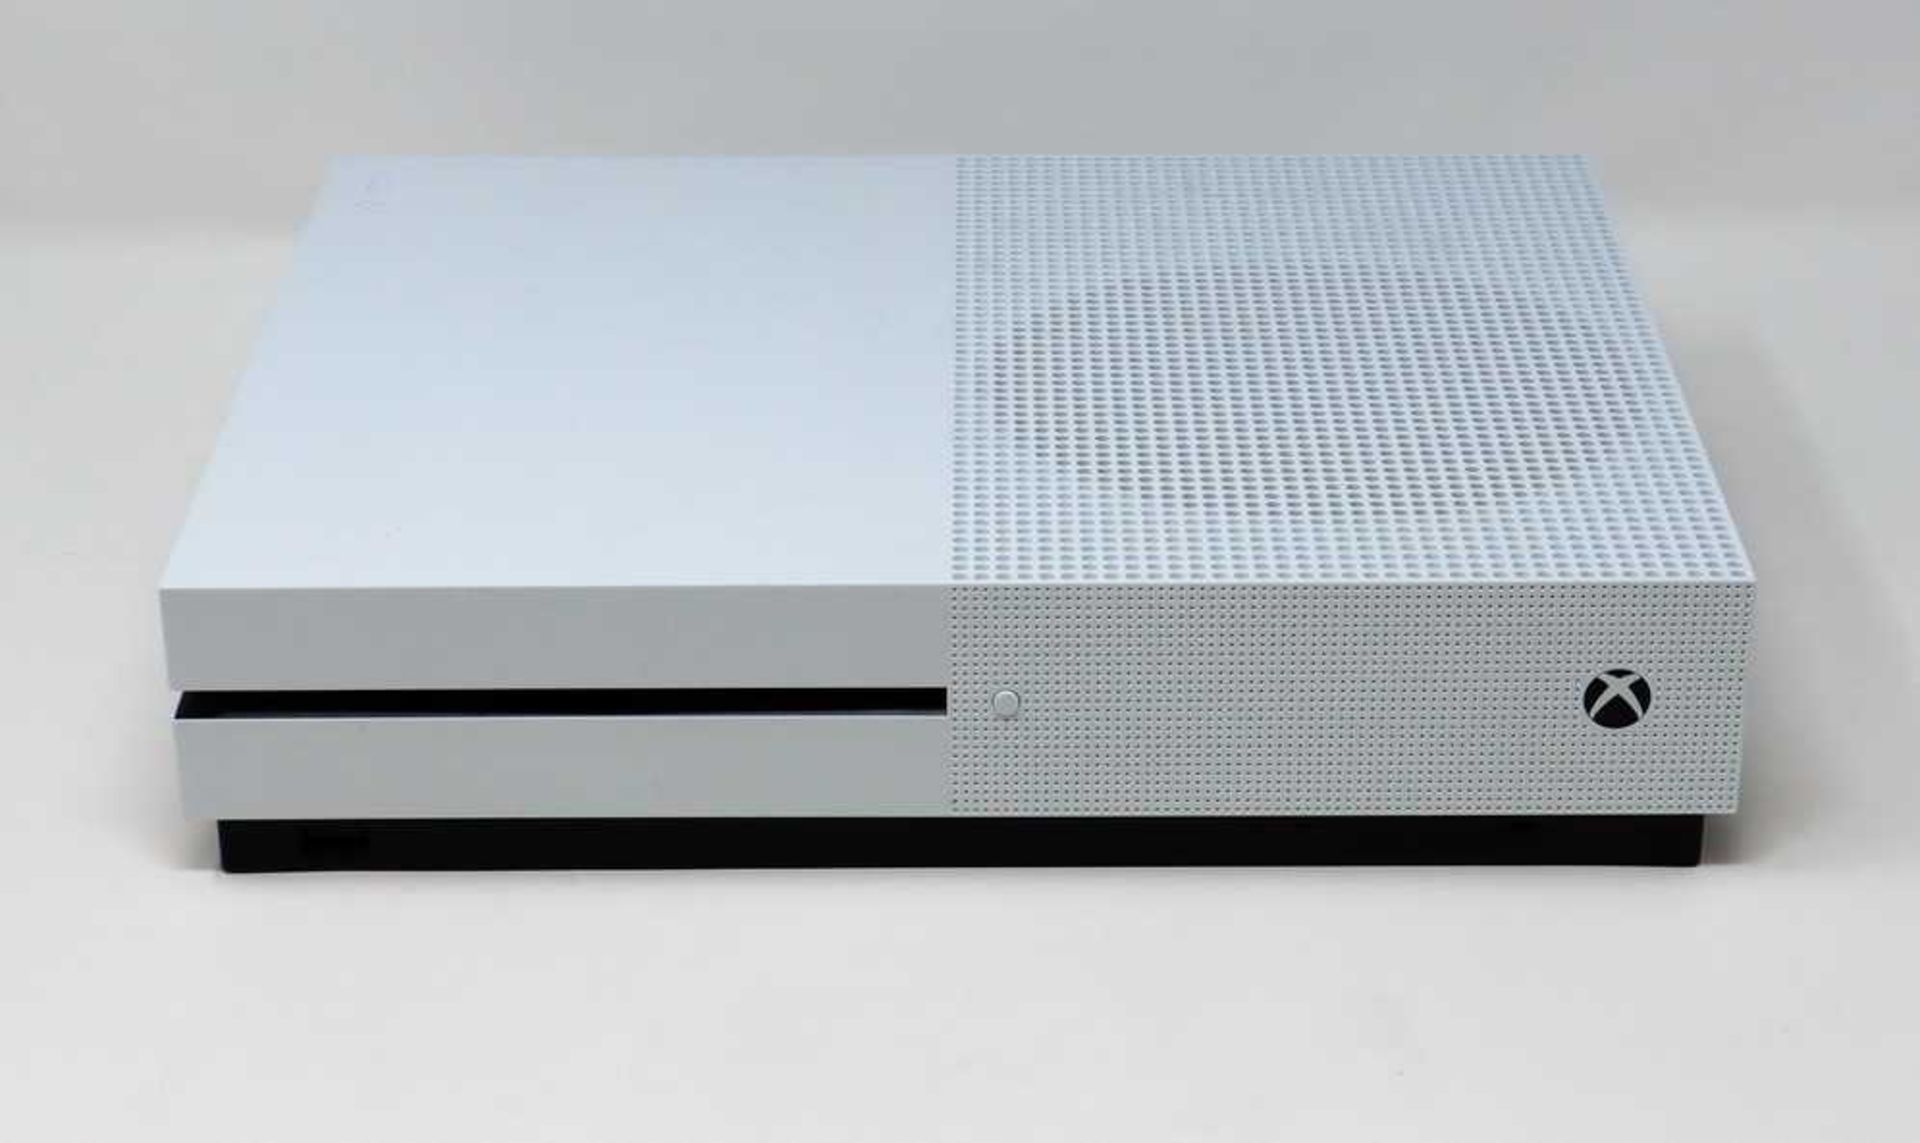 A pre-owned Xbox One S 1TB (console only, no accessories included) (powers on but not further